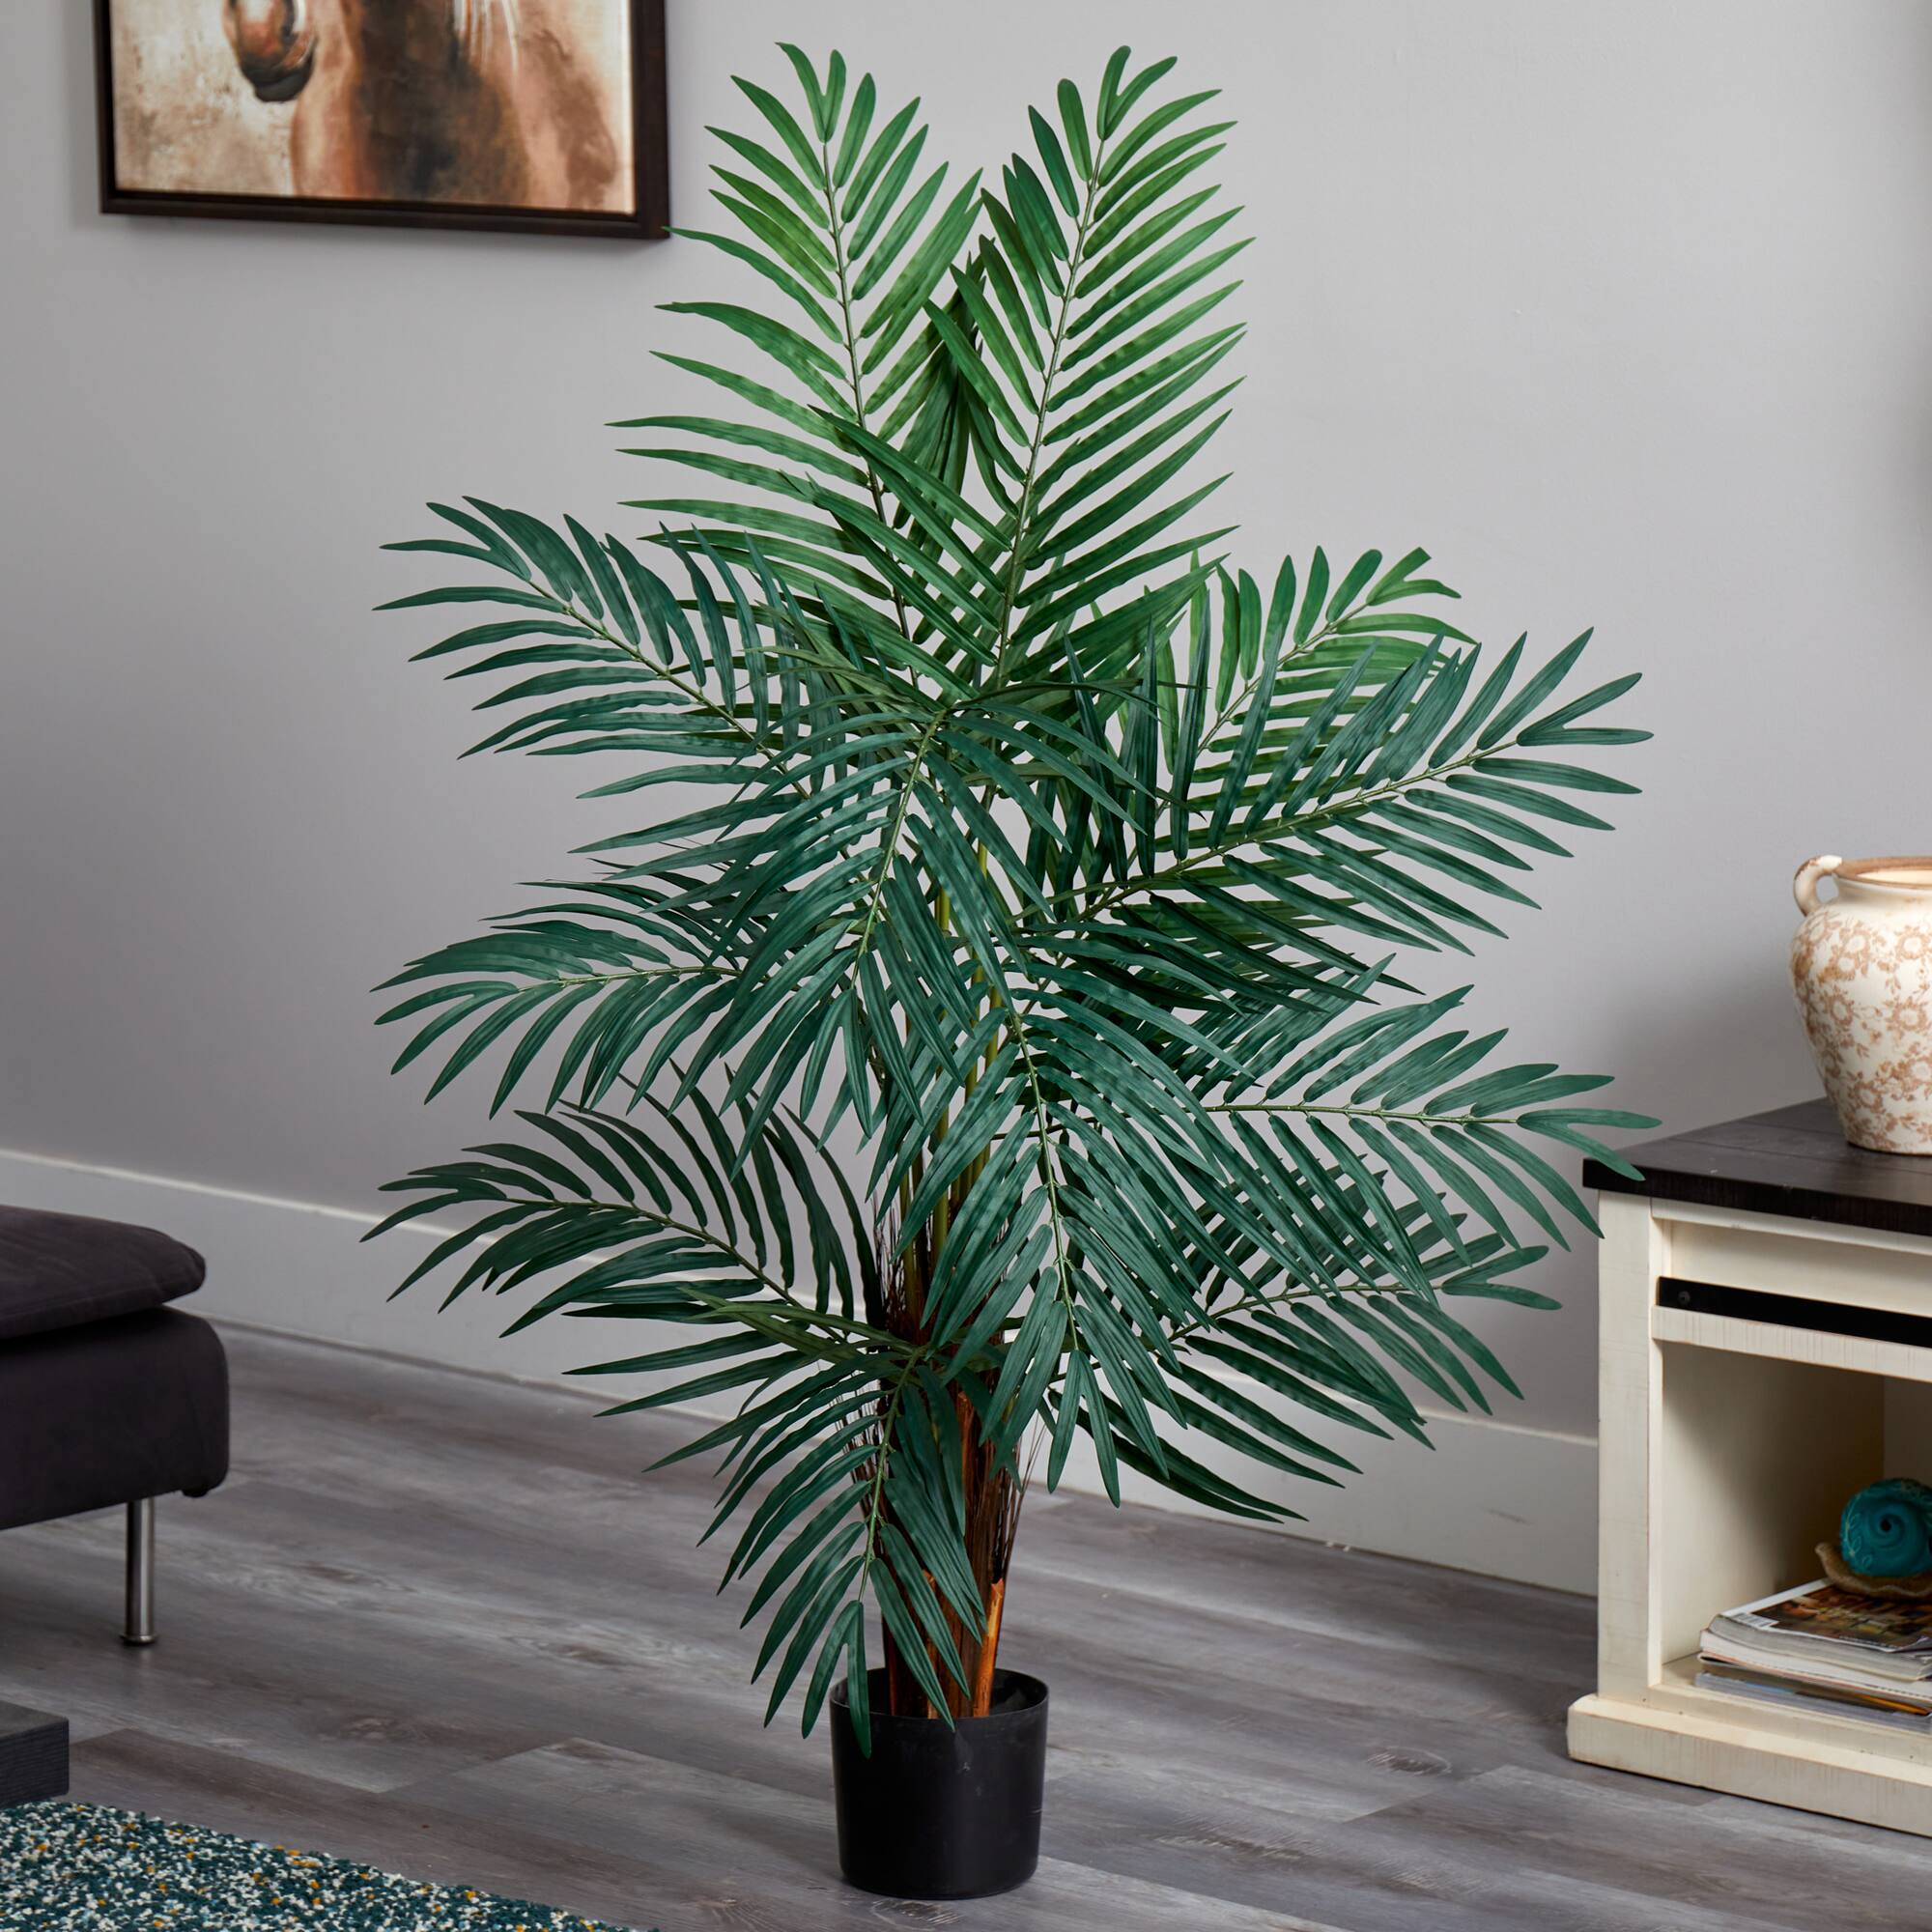 4ft. Potted Areca Palm Tree